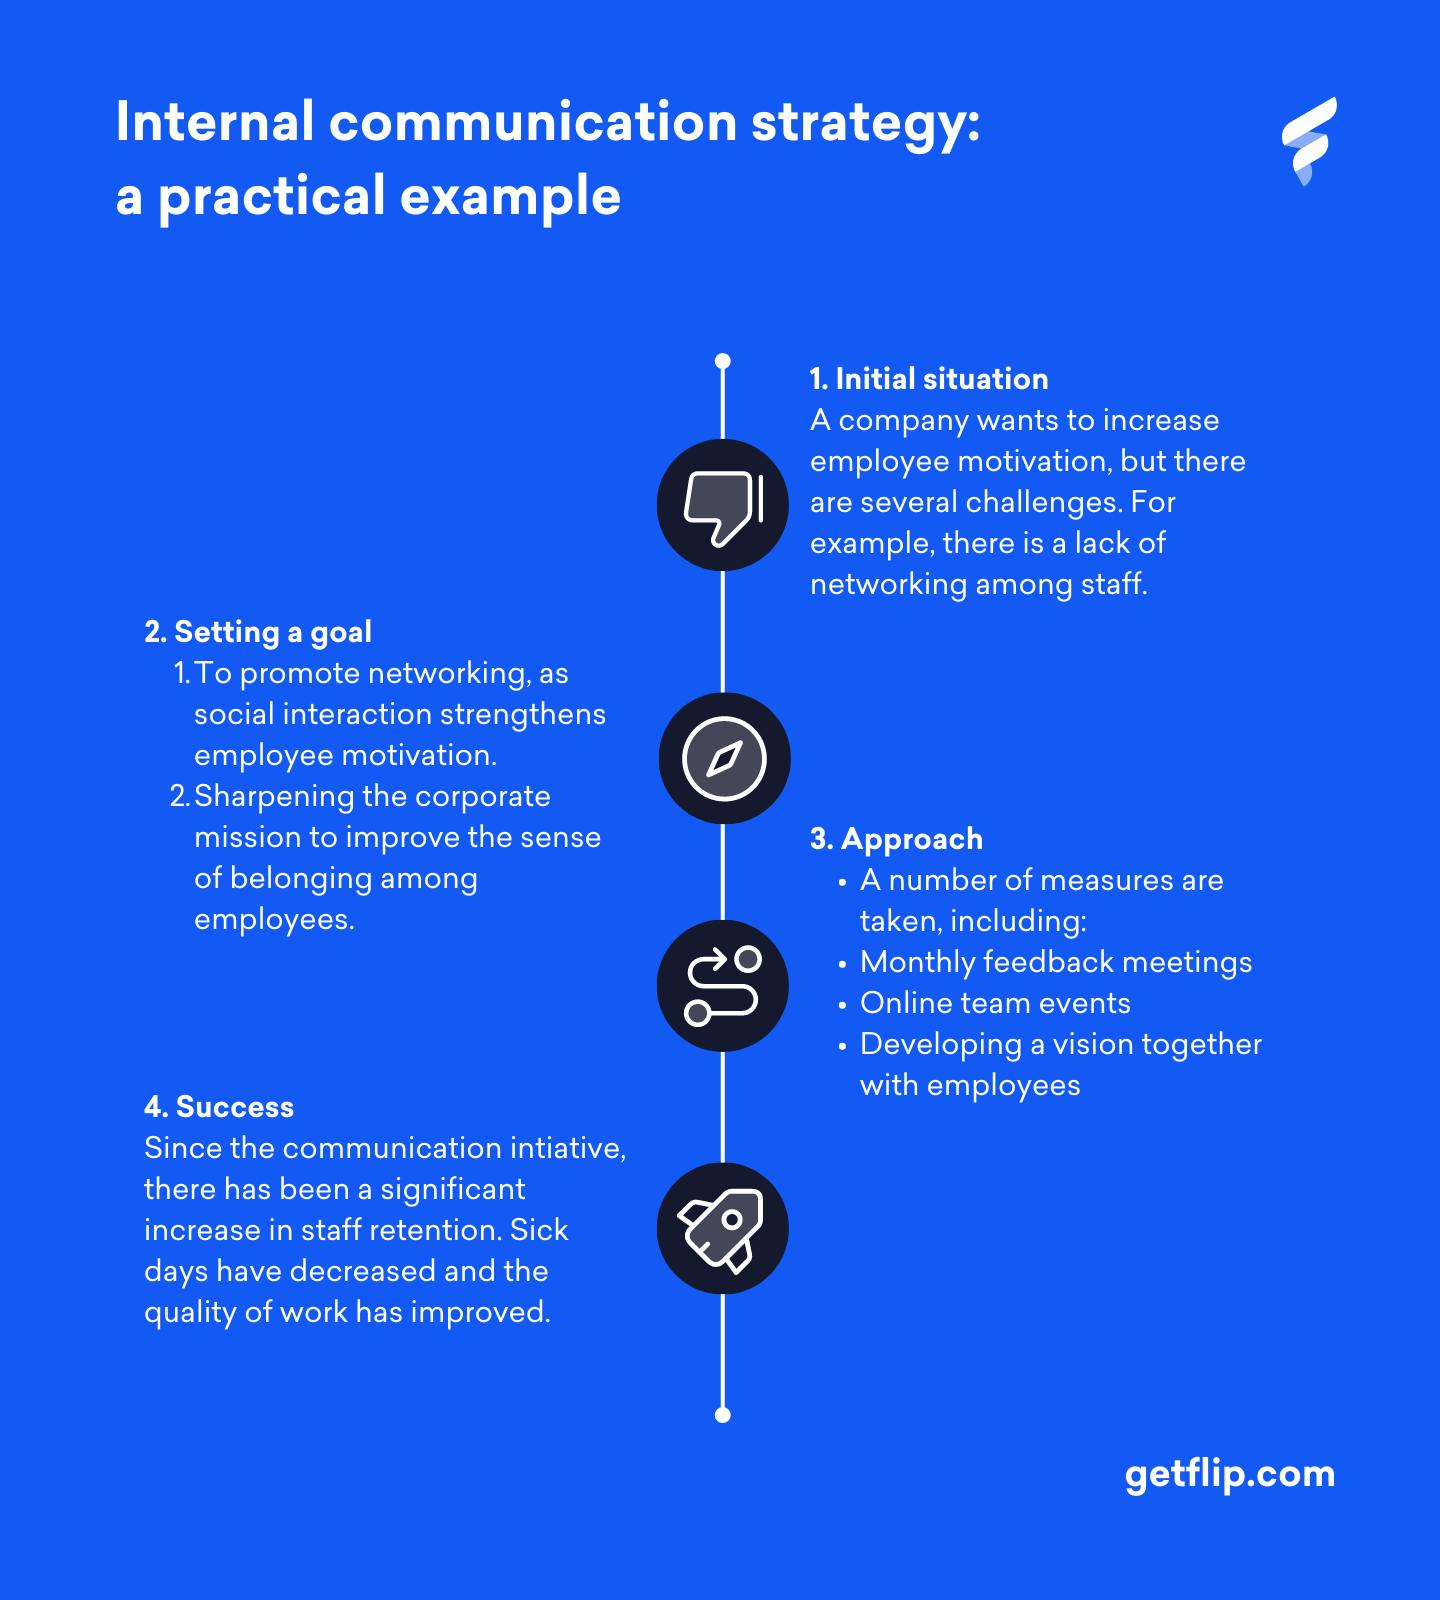 Infographic on "Internal communication strategy: Aapractical example"